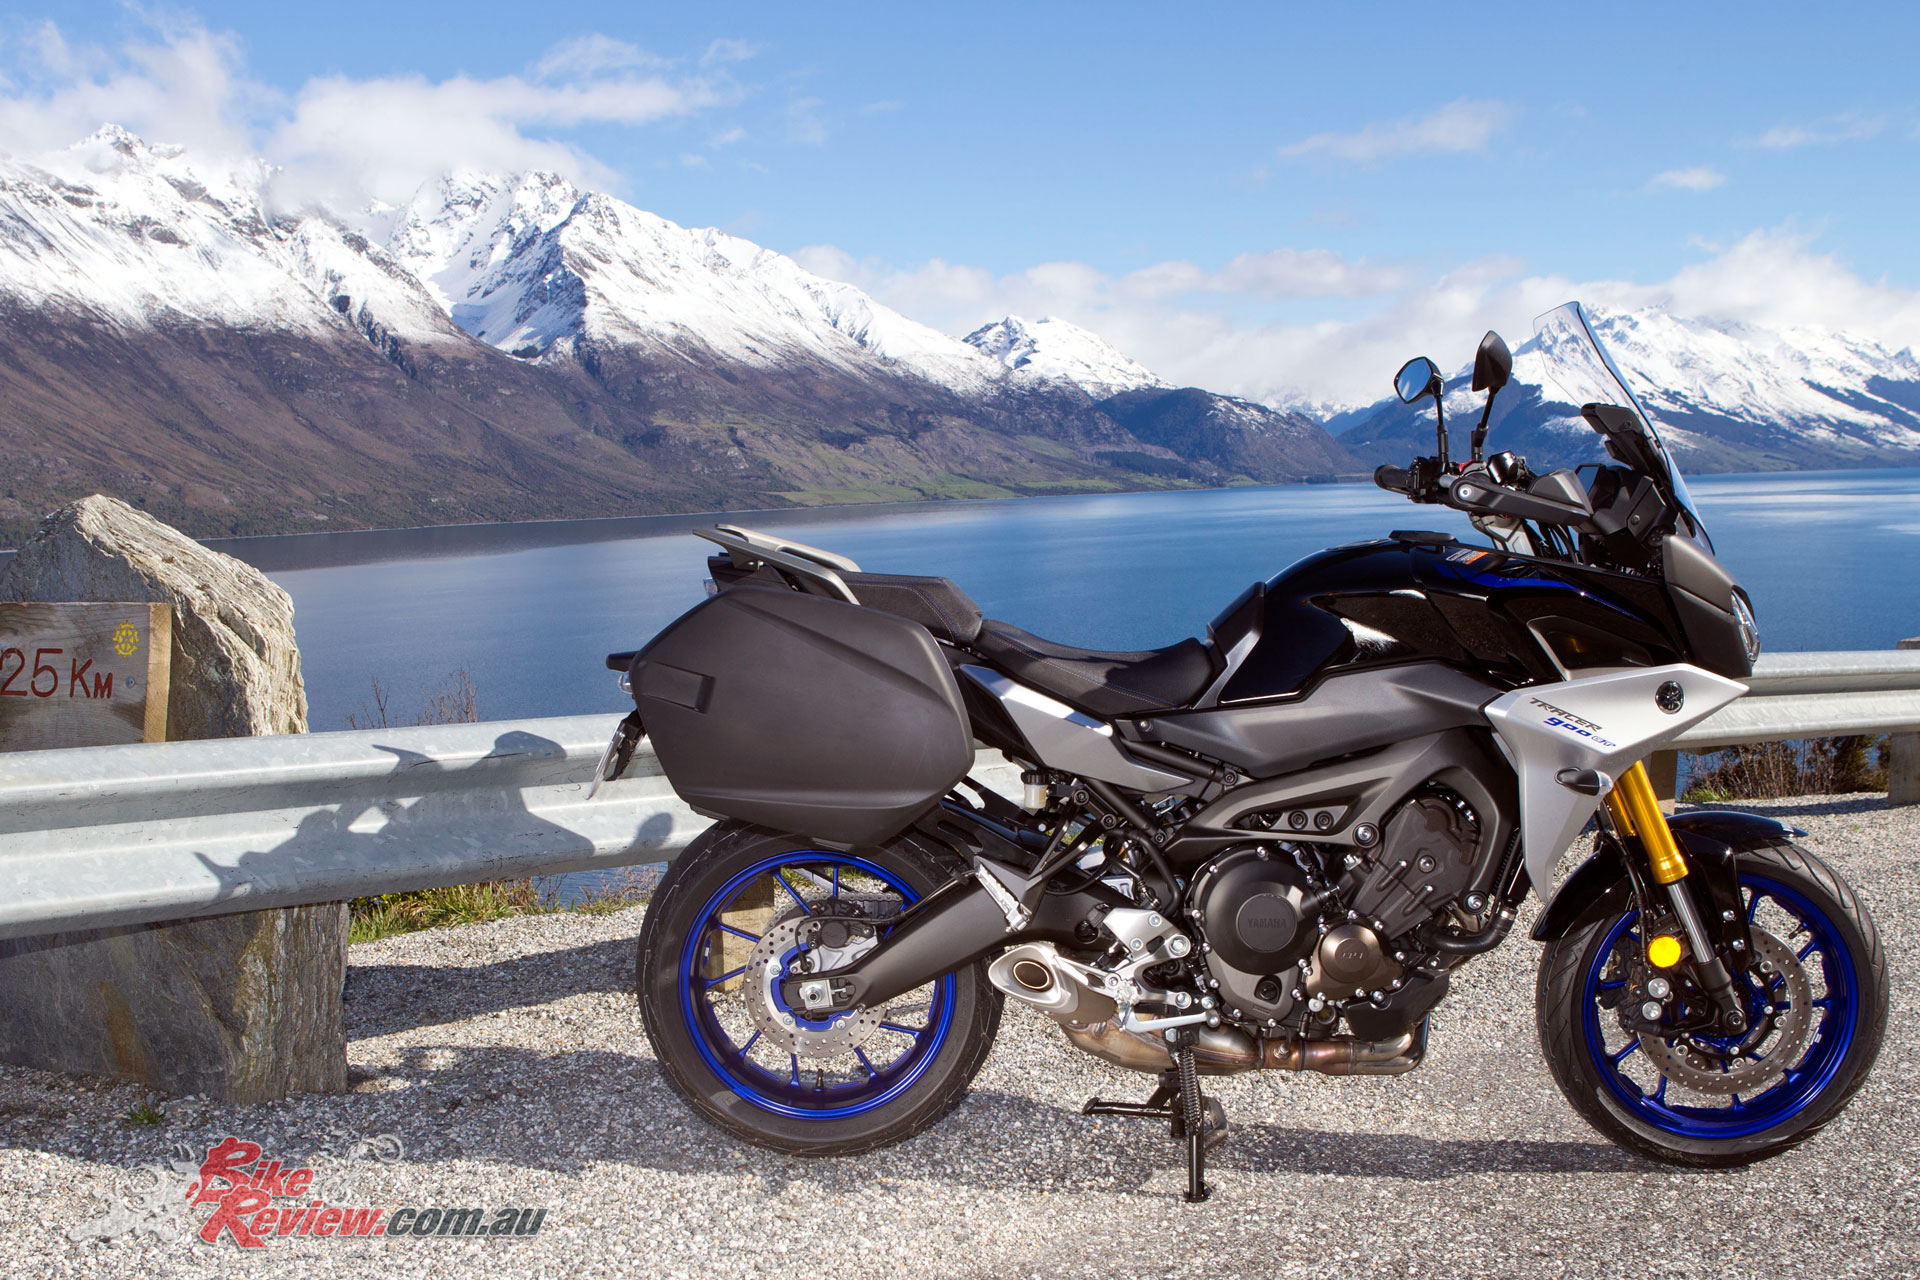 Video Review: 2019 Yamaha Tracer 900 - Bike Review